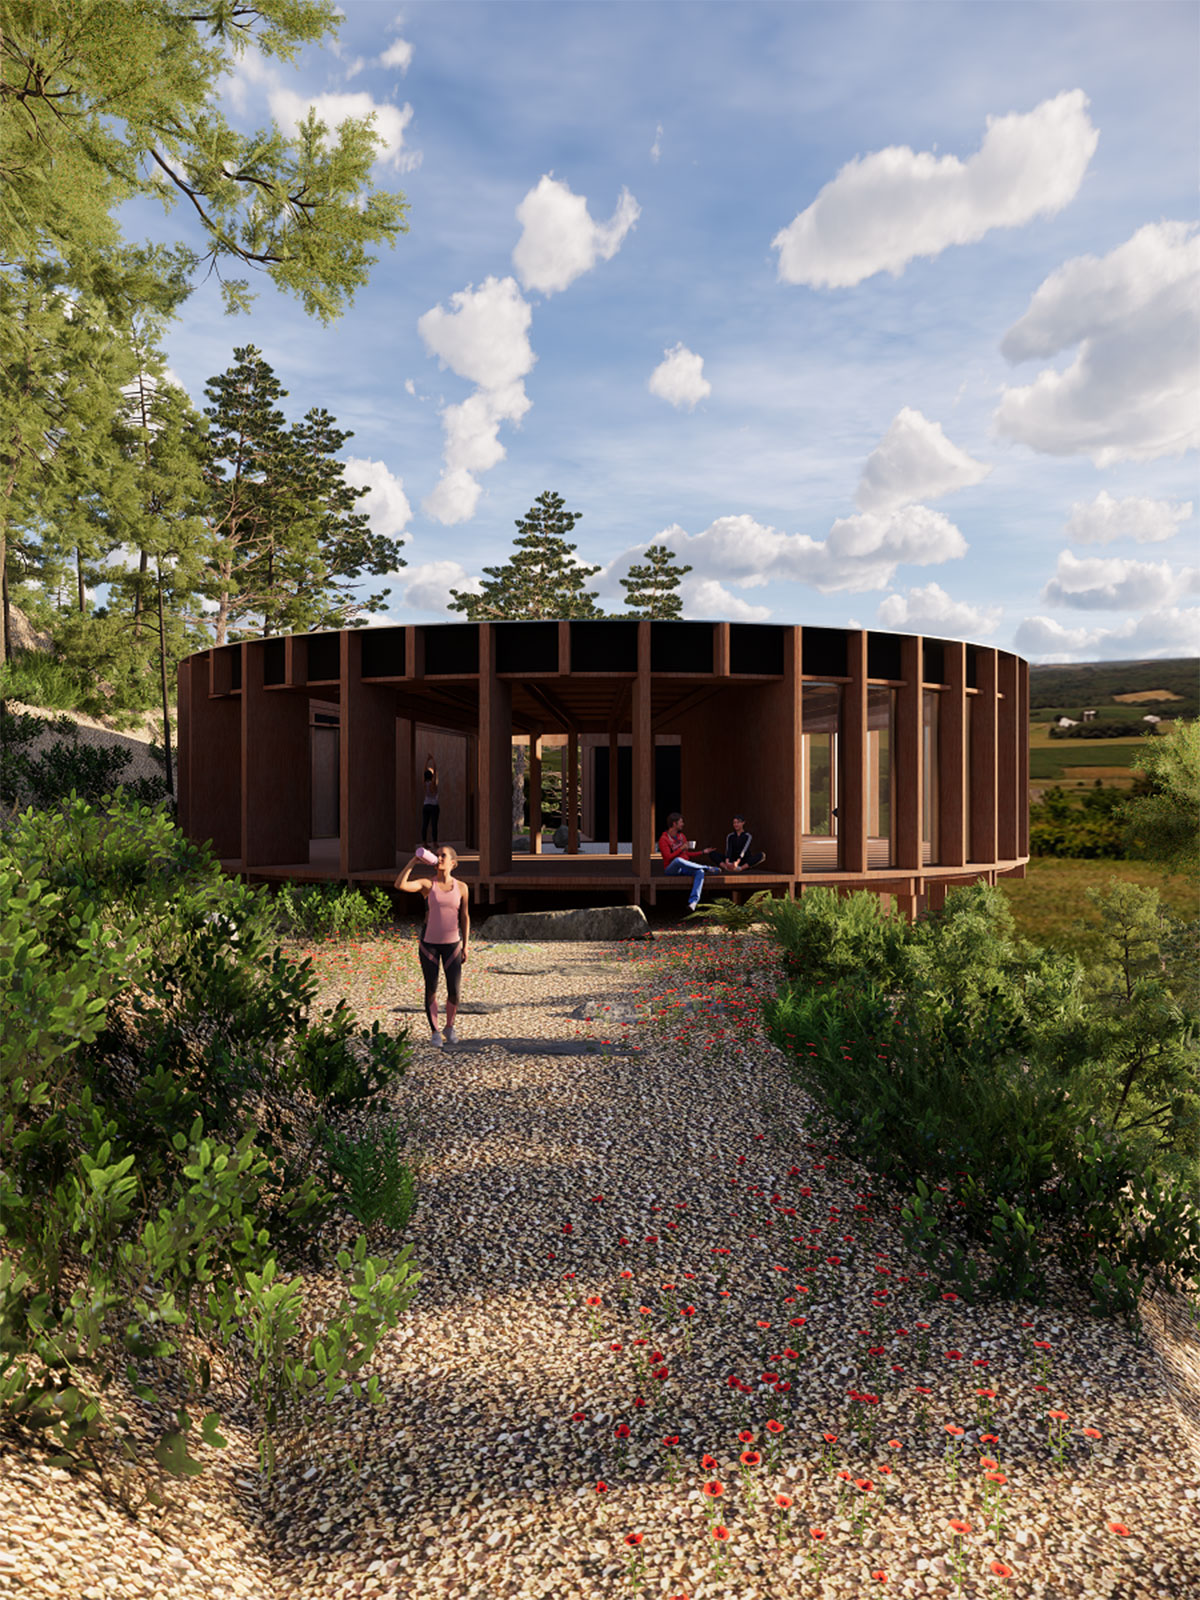 Result Announced – Yoga House on Cliff